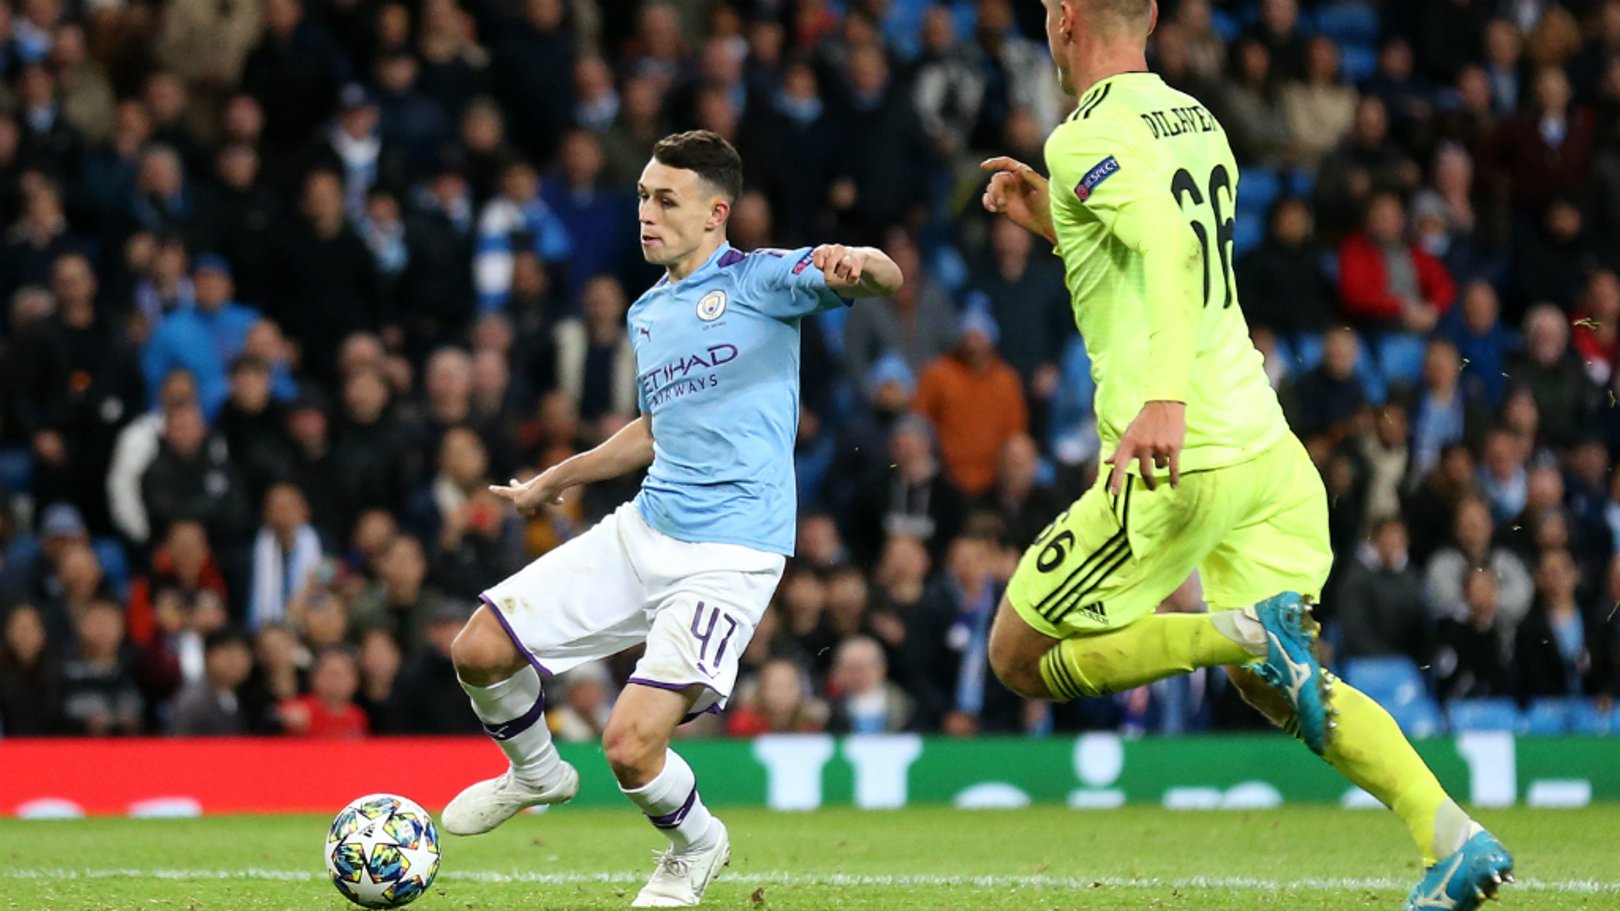 Foden leads City’s Young Lions call ups